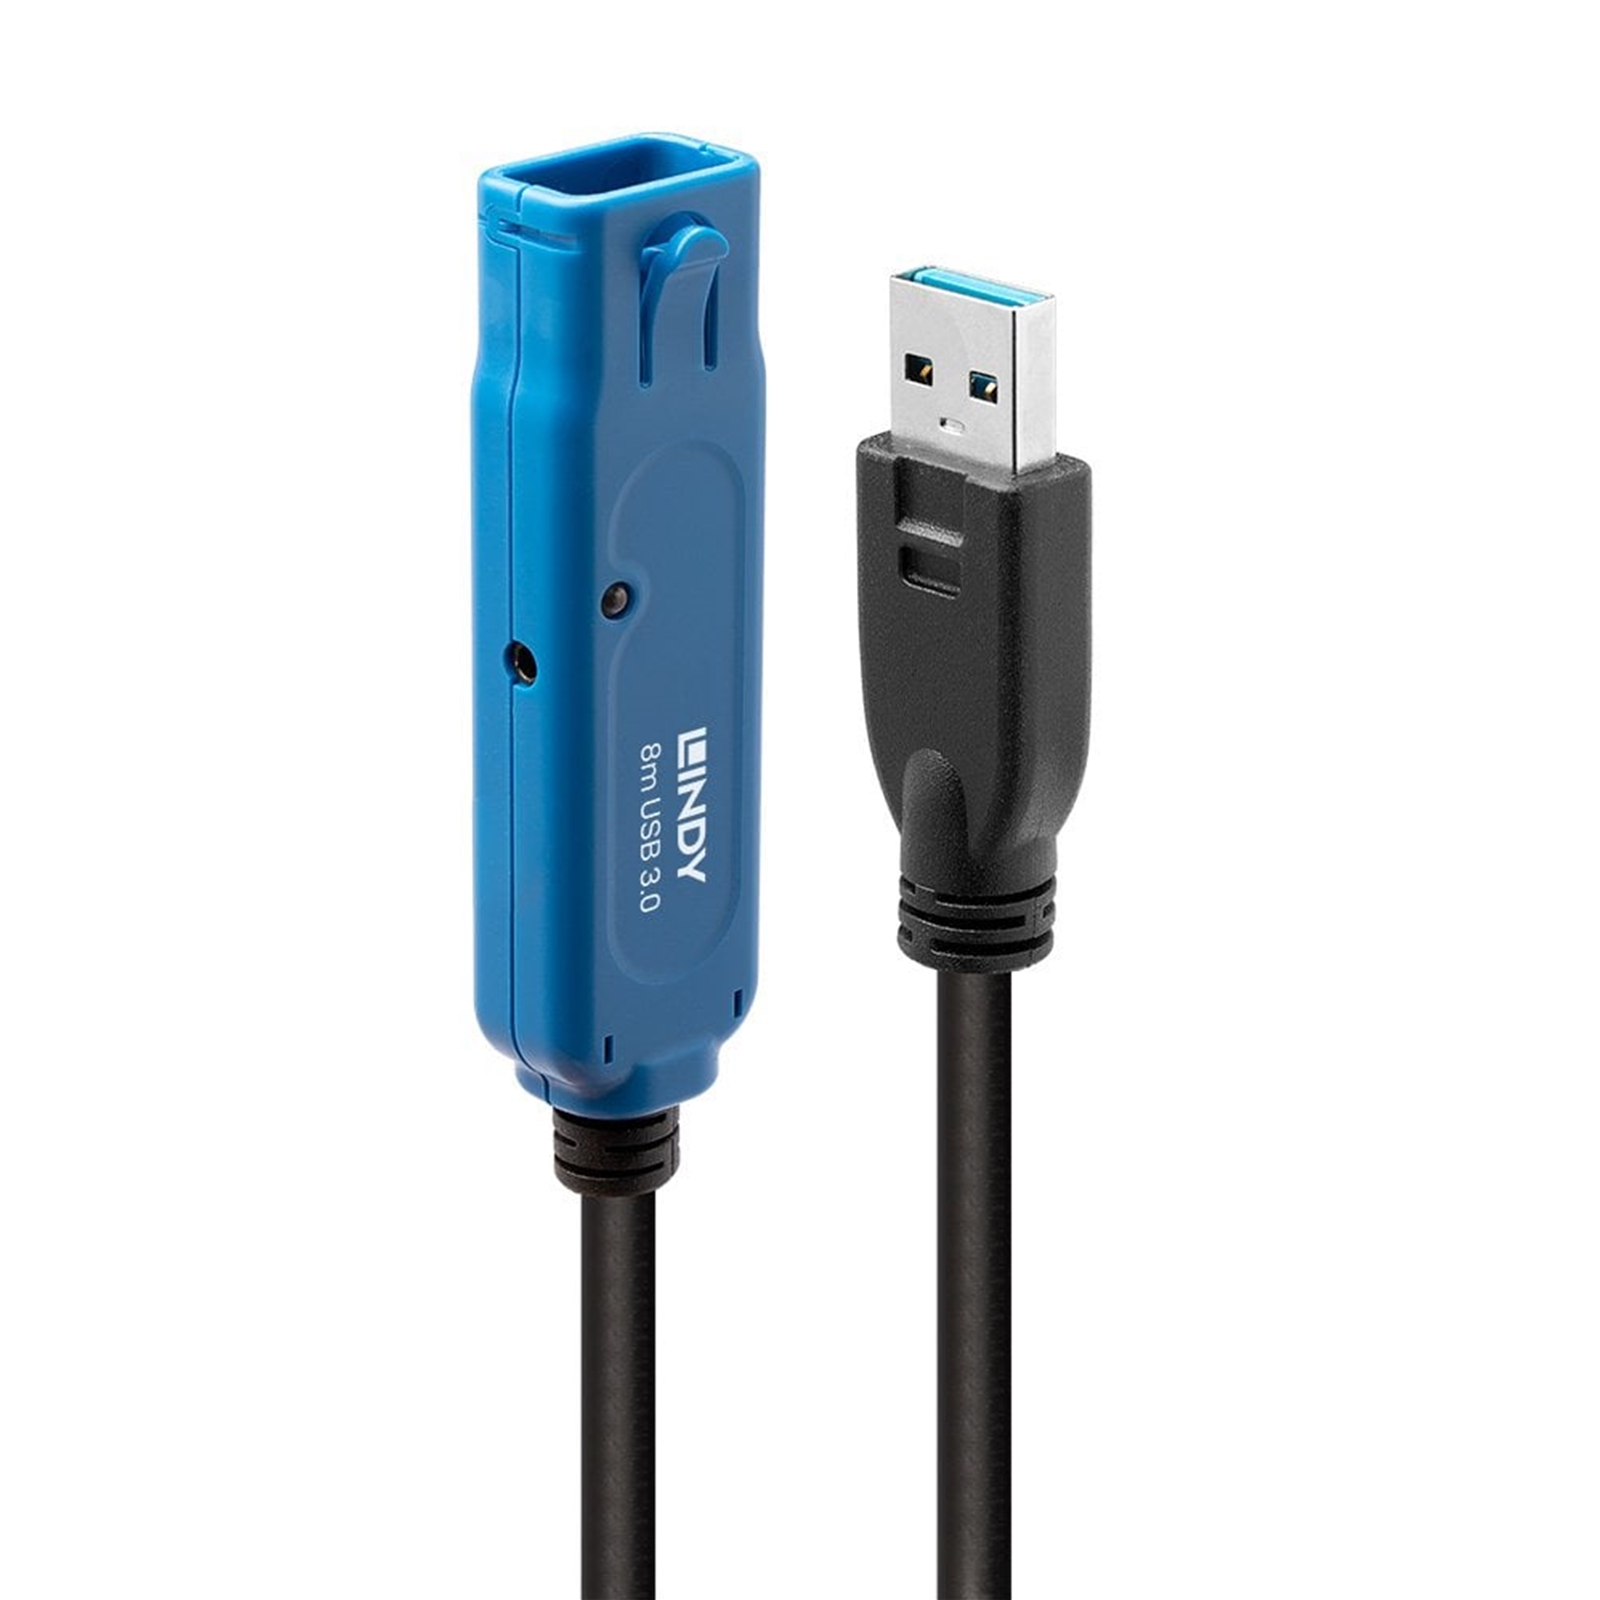 LINDY 43158 8m USB 3.0 Active Extension Pro, Supports the Full USB 3.0 SuperSpeed bandwidth for speeds of 5Gbps, Easy to use, Connects to the device’s existing USB cable (2m maximum), 2 Year Warranty